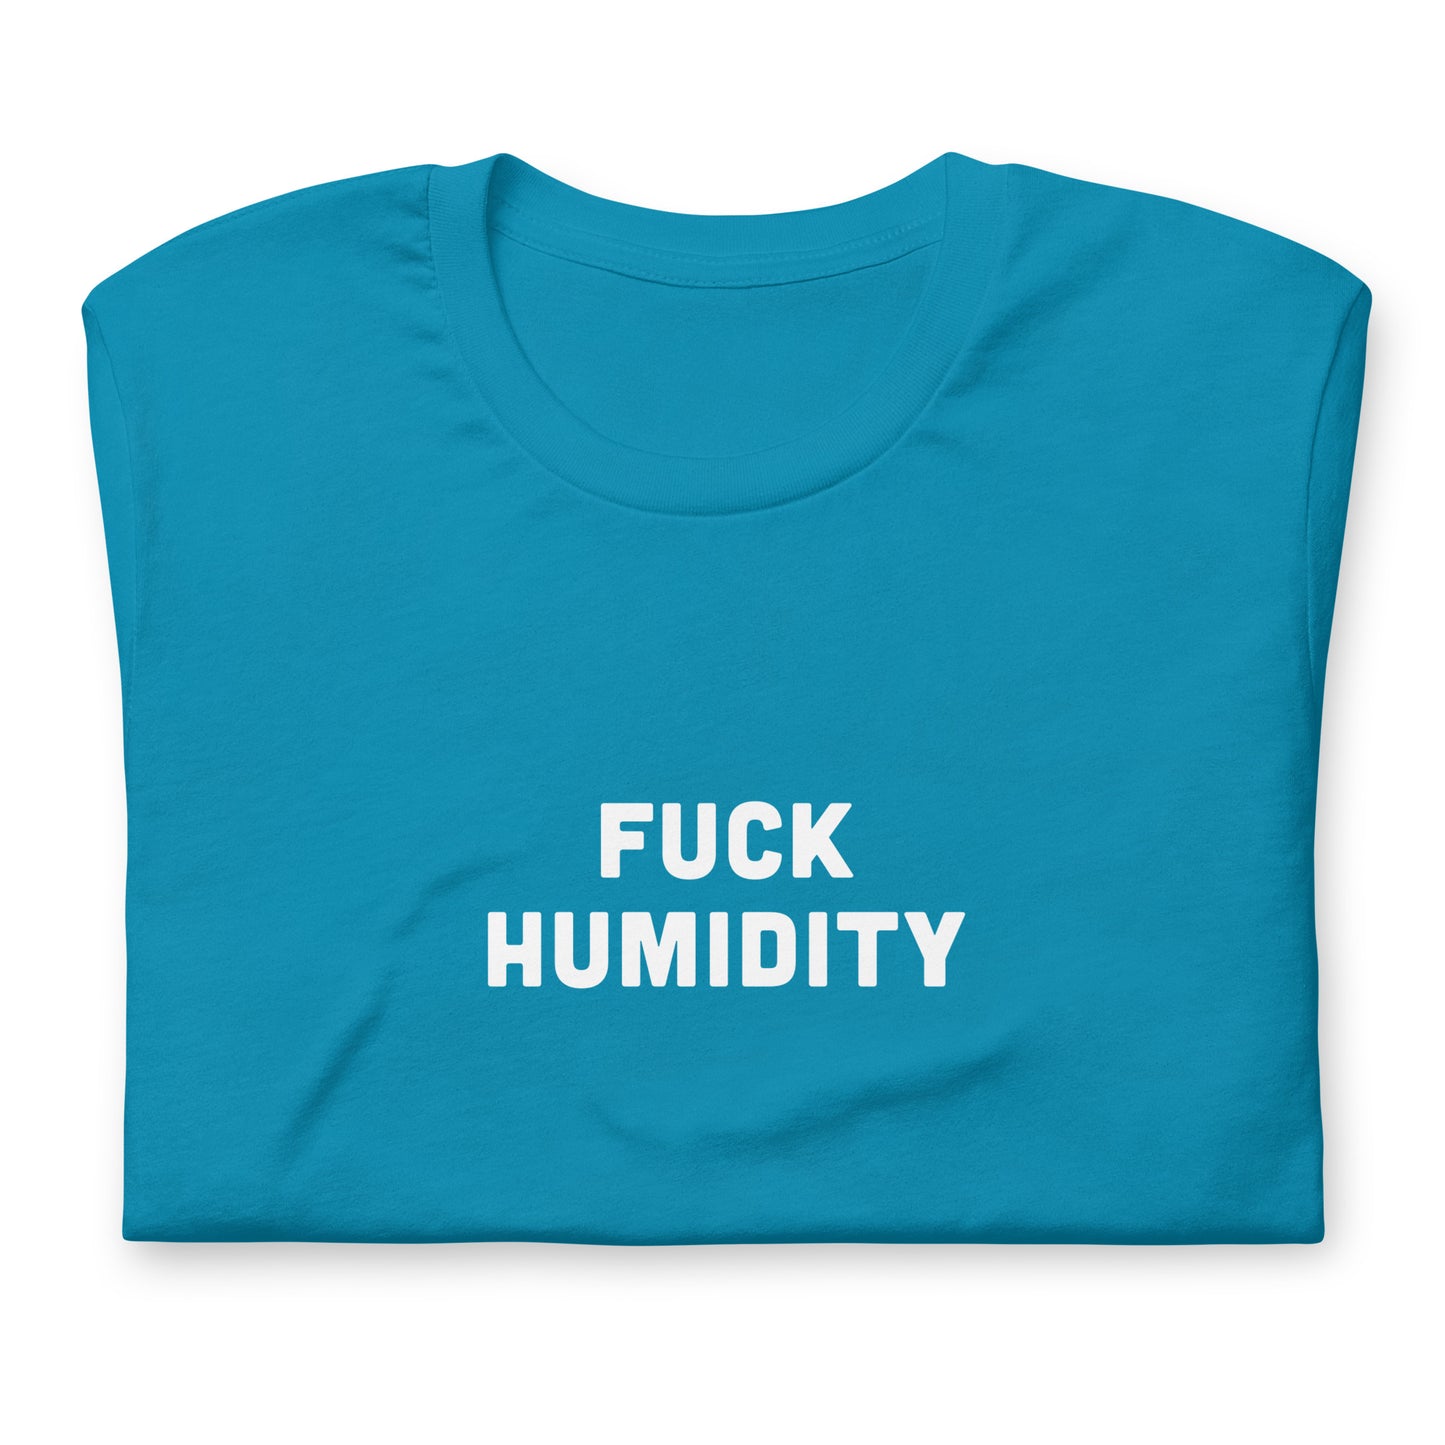 Fuck Humidity T-Shirt Size L Color Navy